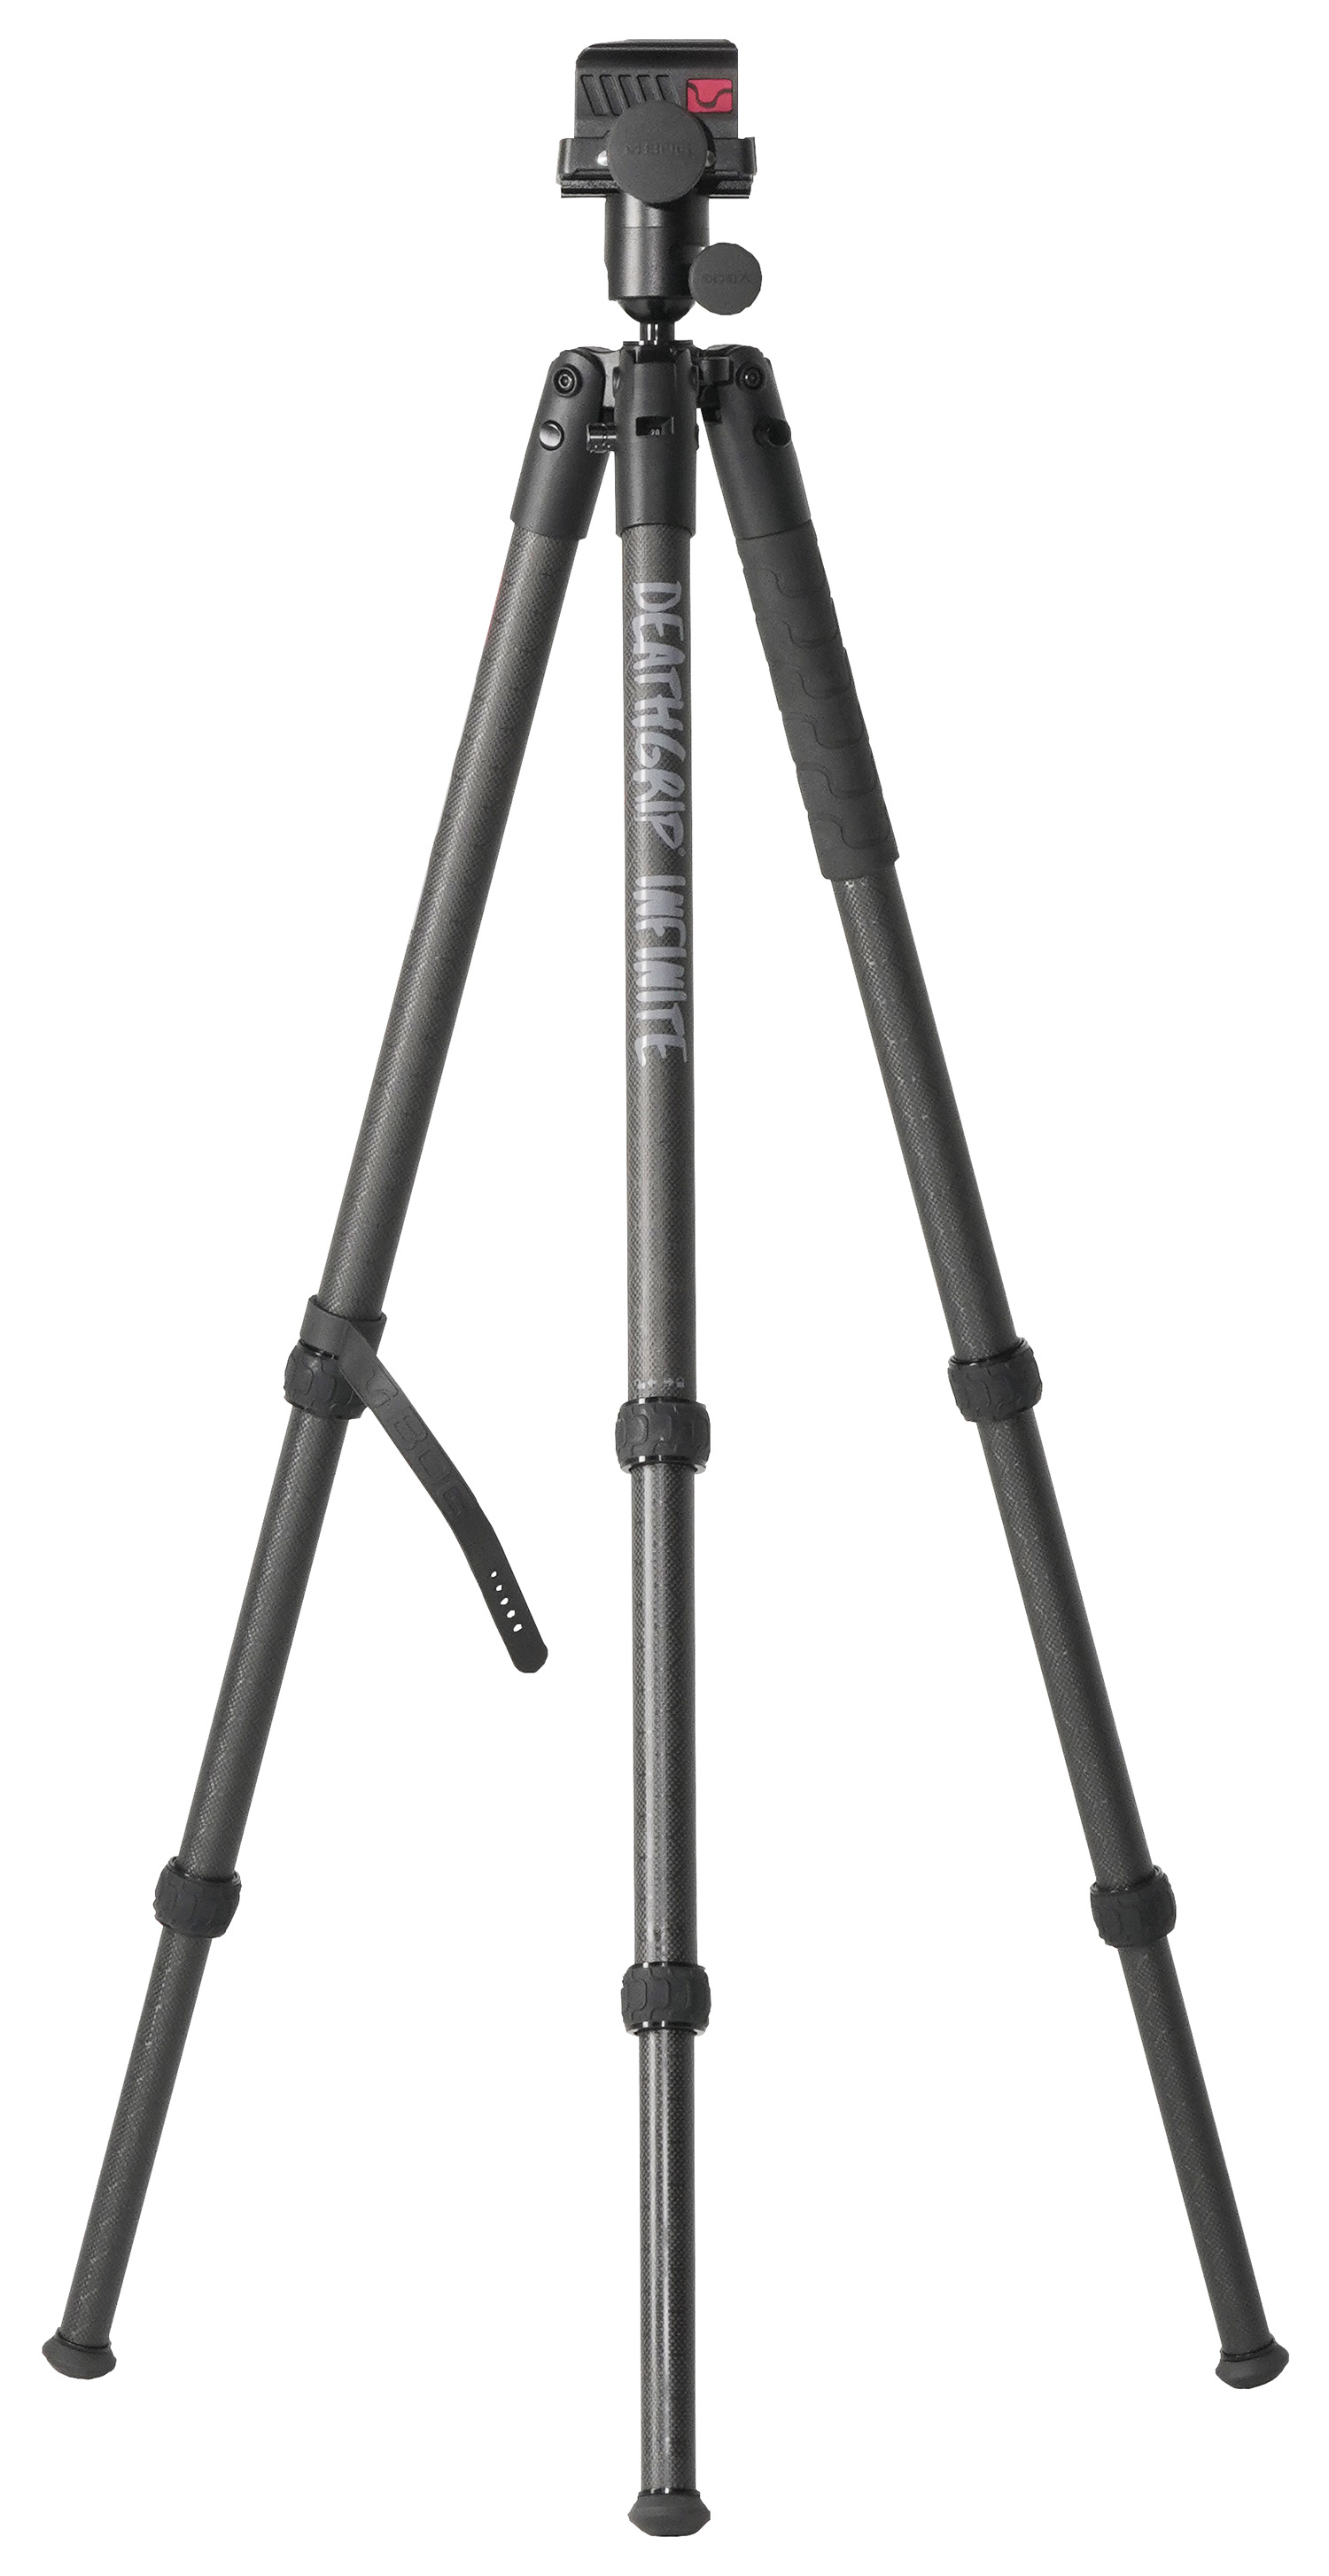 Bog-Pod 1163389 DeathGrip Infinite Tripod made of Carbon Fiber with Black Finish, Ball Head Mount, Hybrid Foot & DeathGrip Clamping System